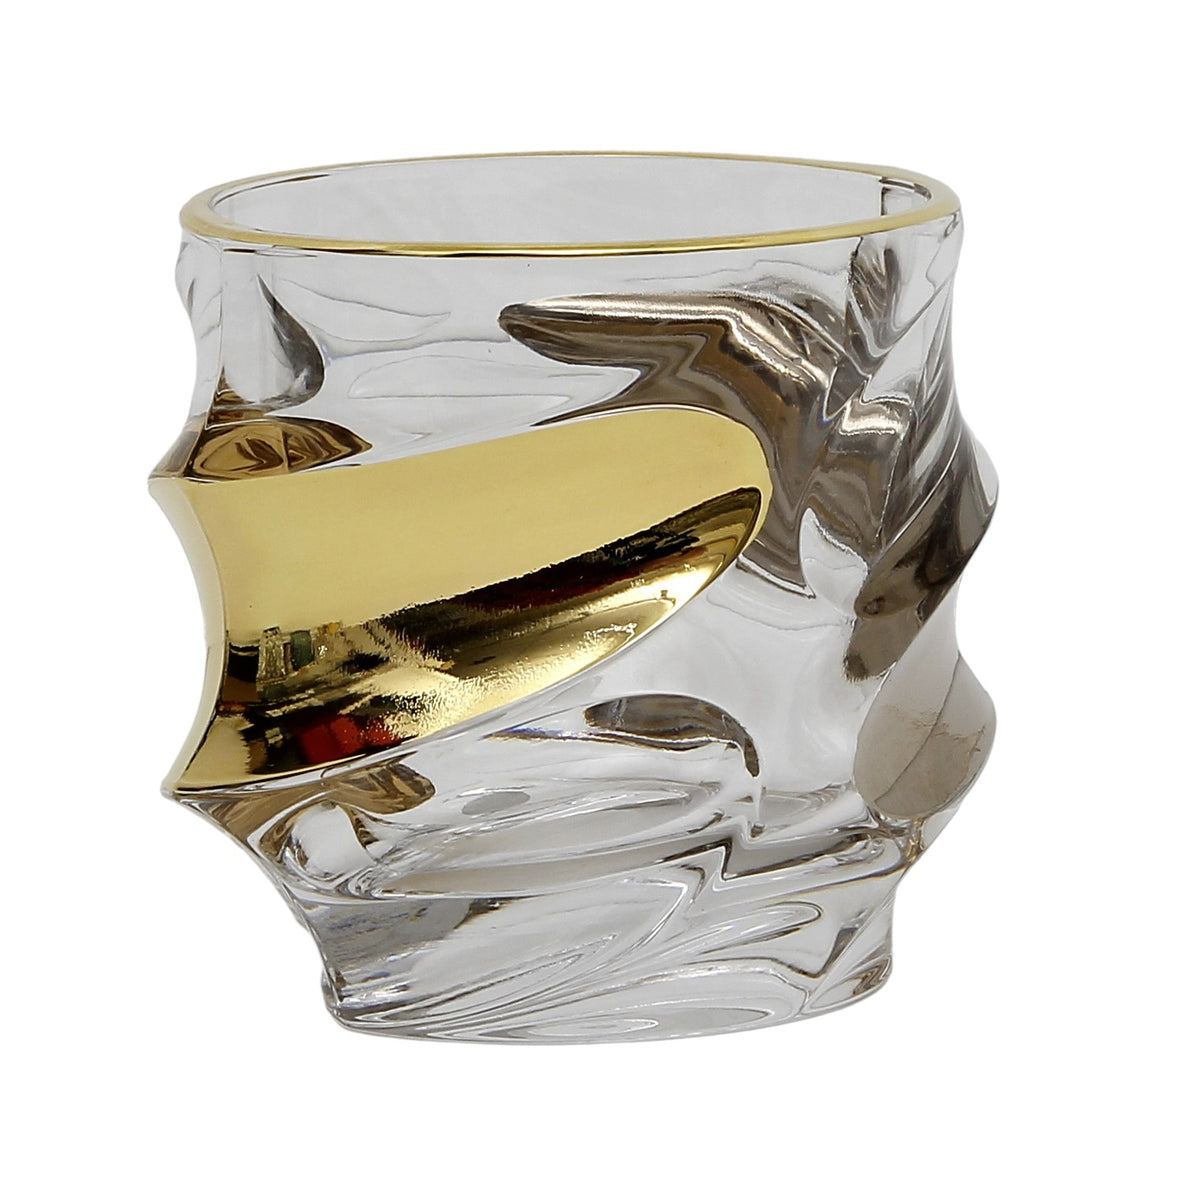 CRYSTAL GLASS: Exquisite Italian Crystal Glass for Whiskey/Old Fashion featuring a 24 Carat Gold Rim and Gold/Platinum Accents.